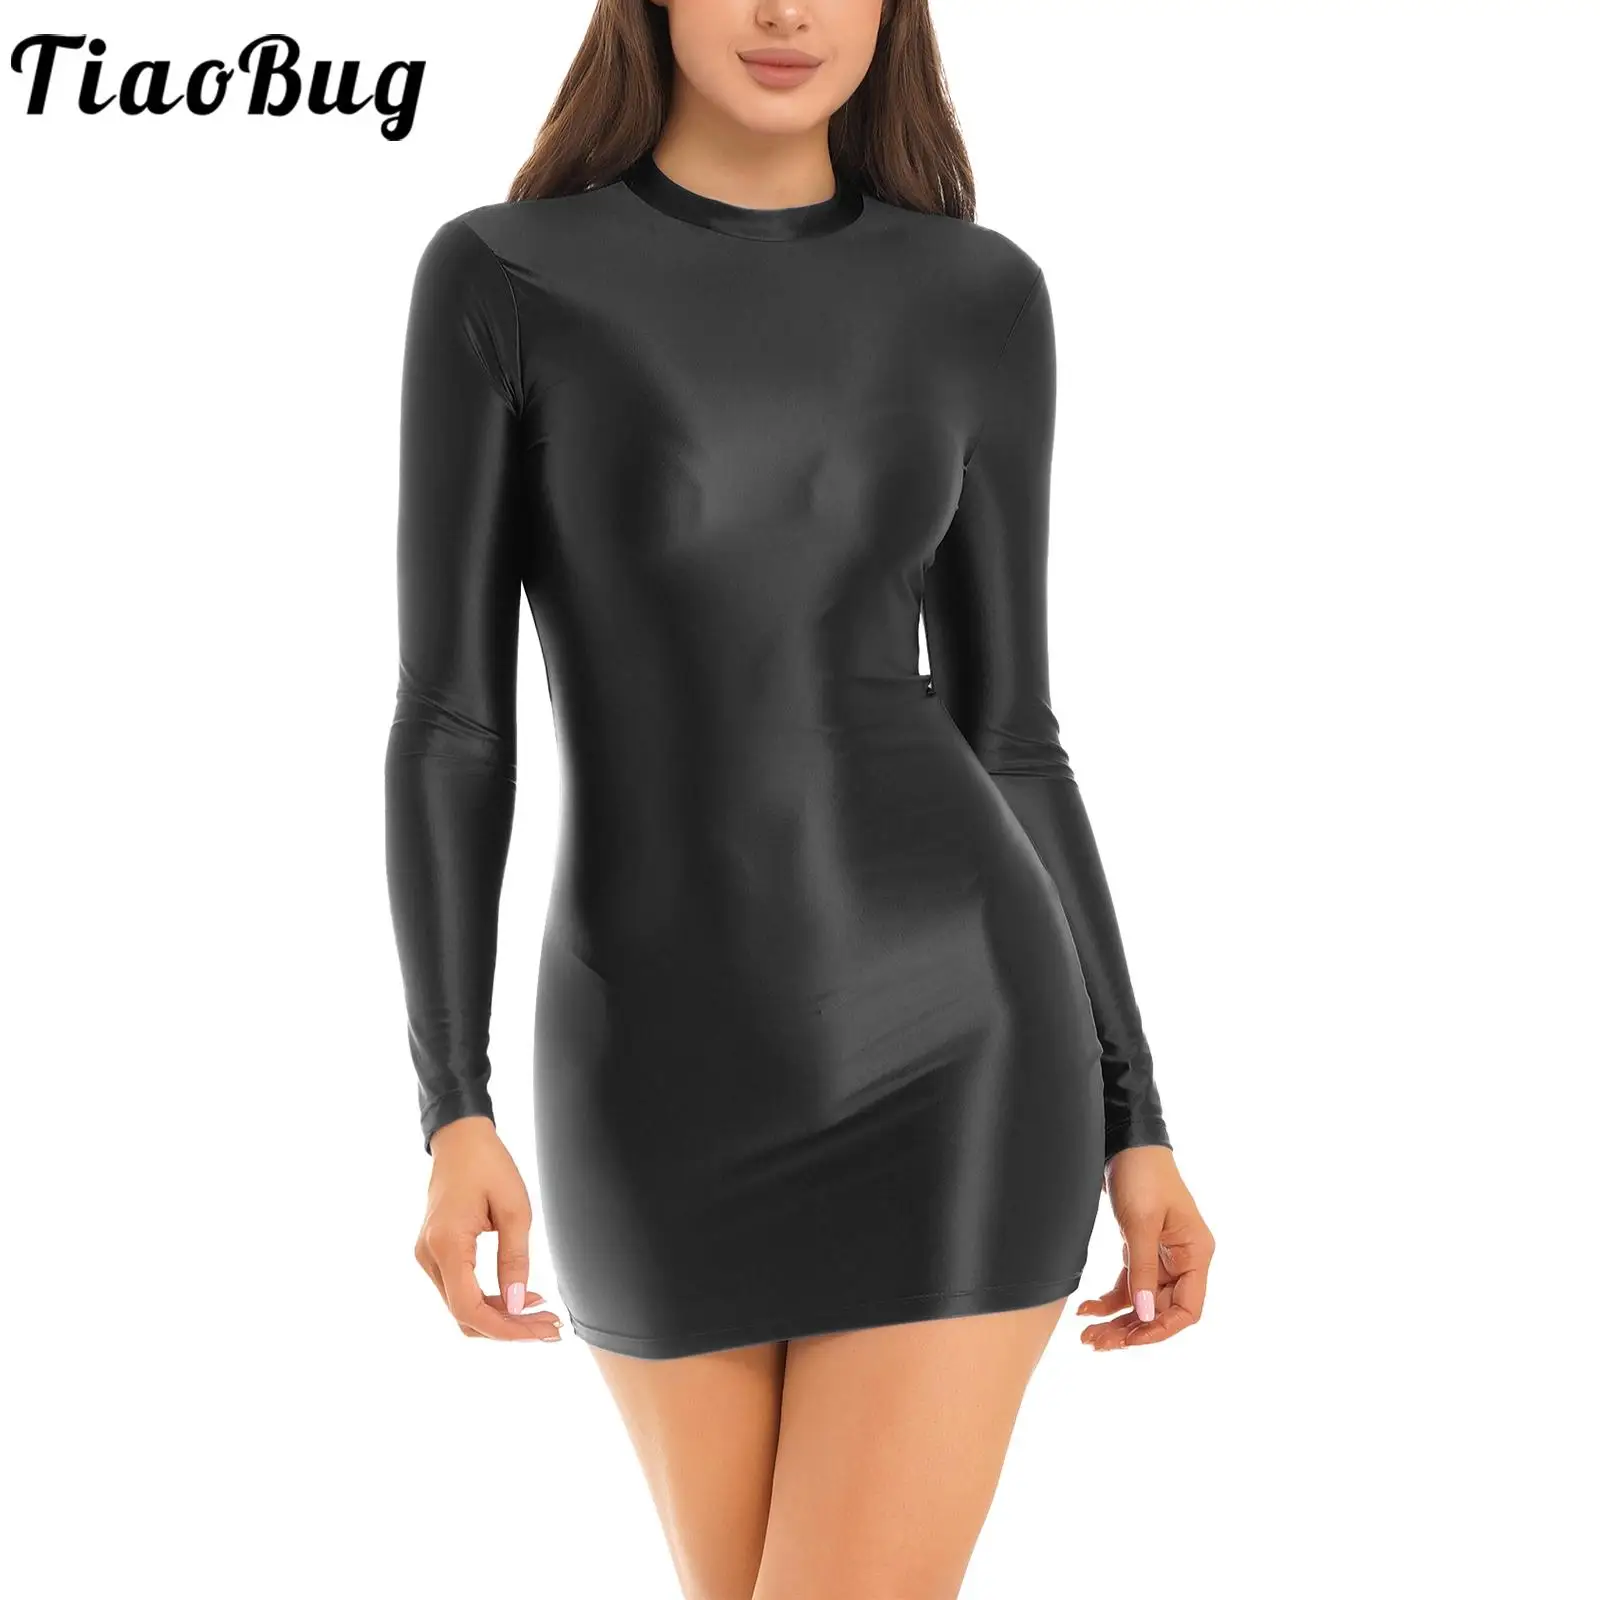 2022 spring new sexy cut out mini dress mesh patchwork see through deep v sleeveless bodycon dress party club outfit Women Sexy Oil Glossy Micro Mini Dress Tight Party Dress Pencil Bodycon Dress Club Outfit Nightwear Pole Dancing Costume